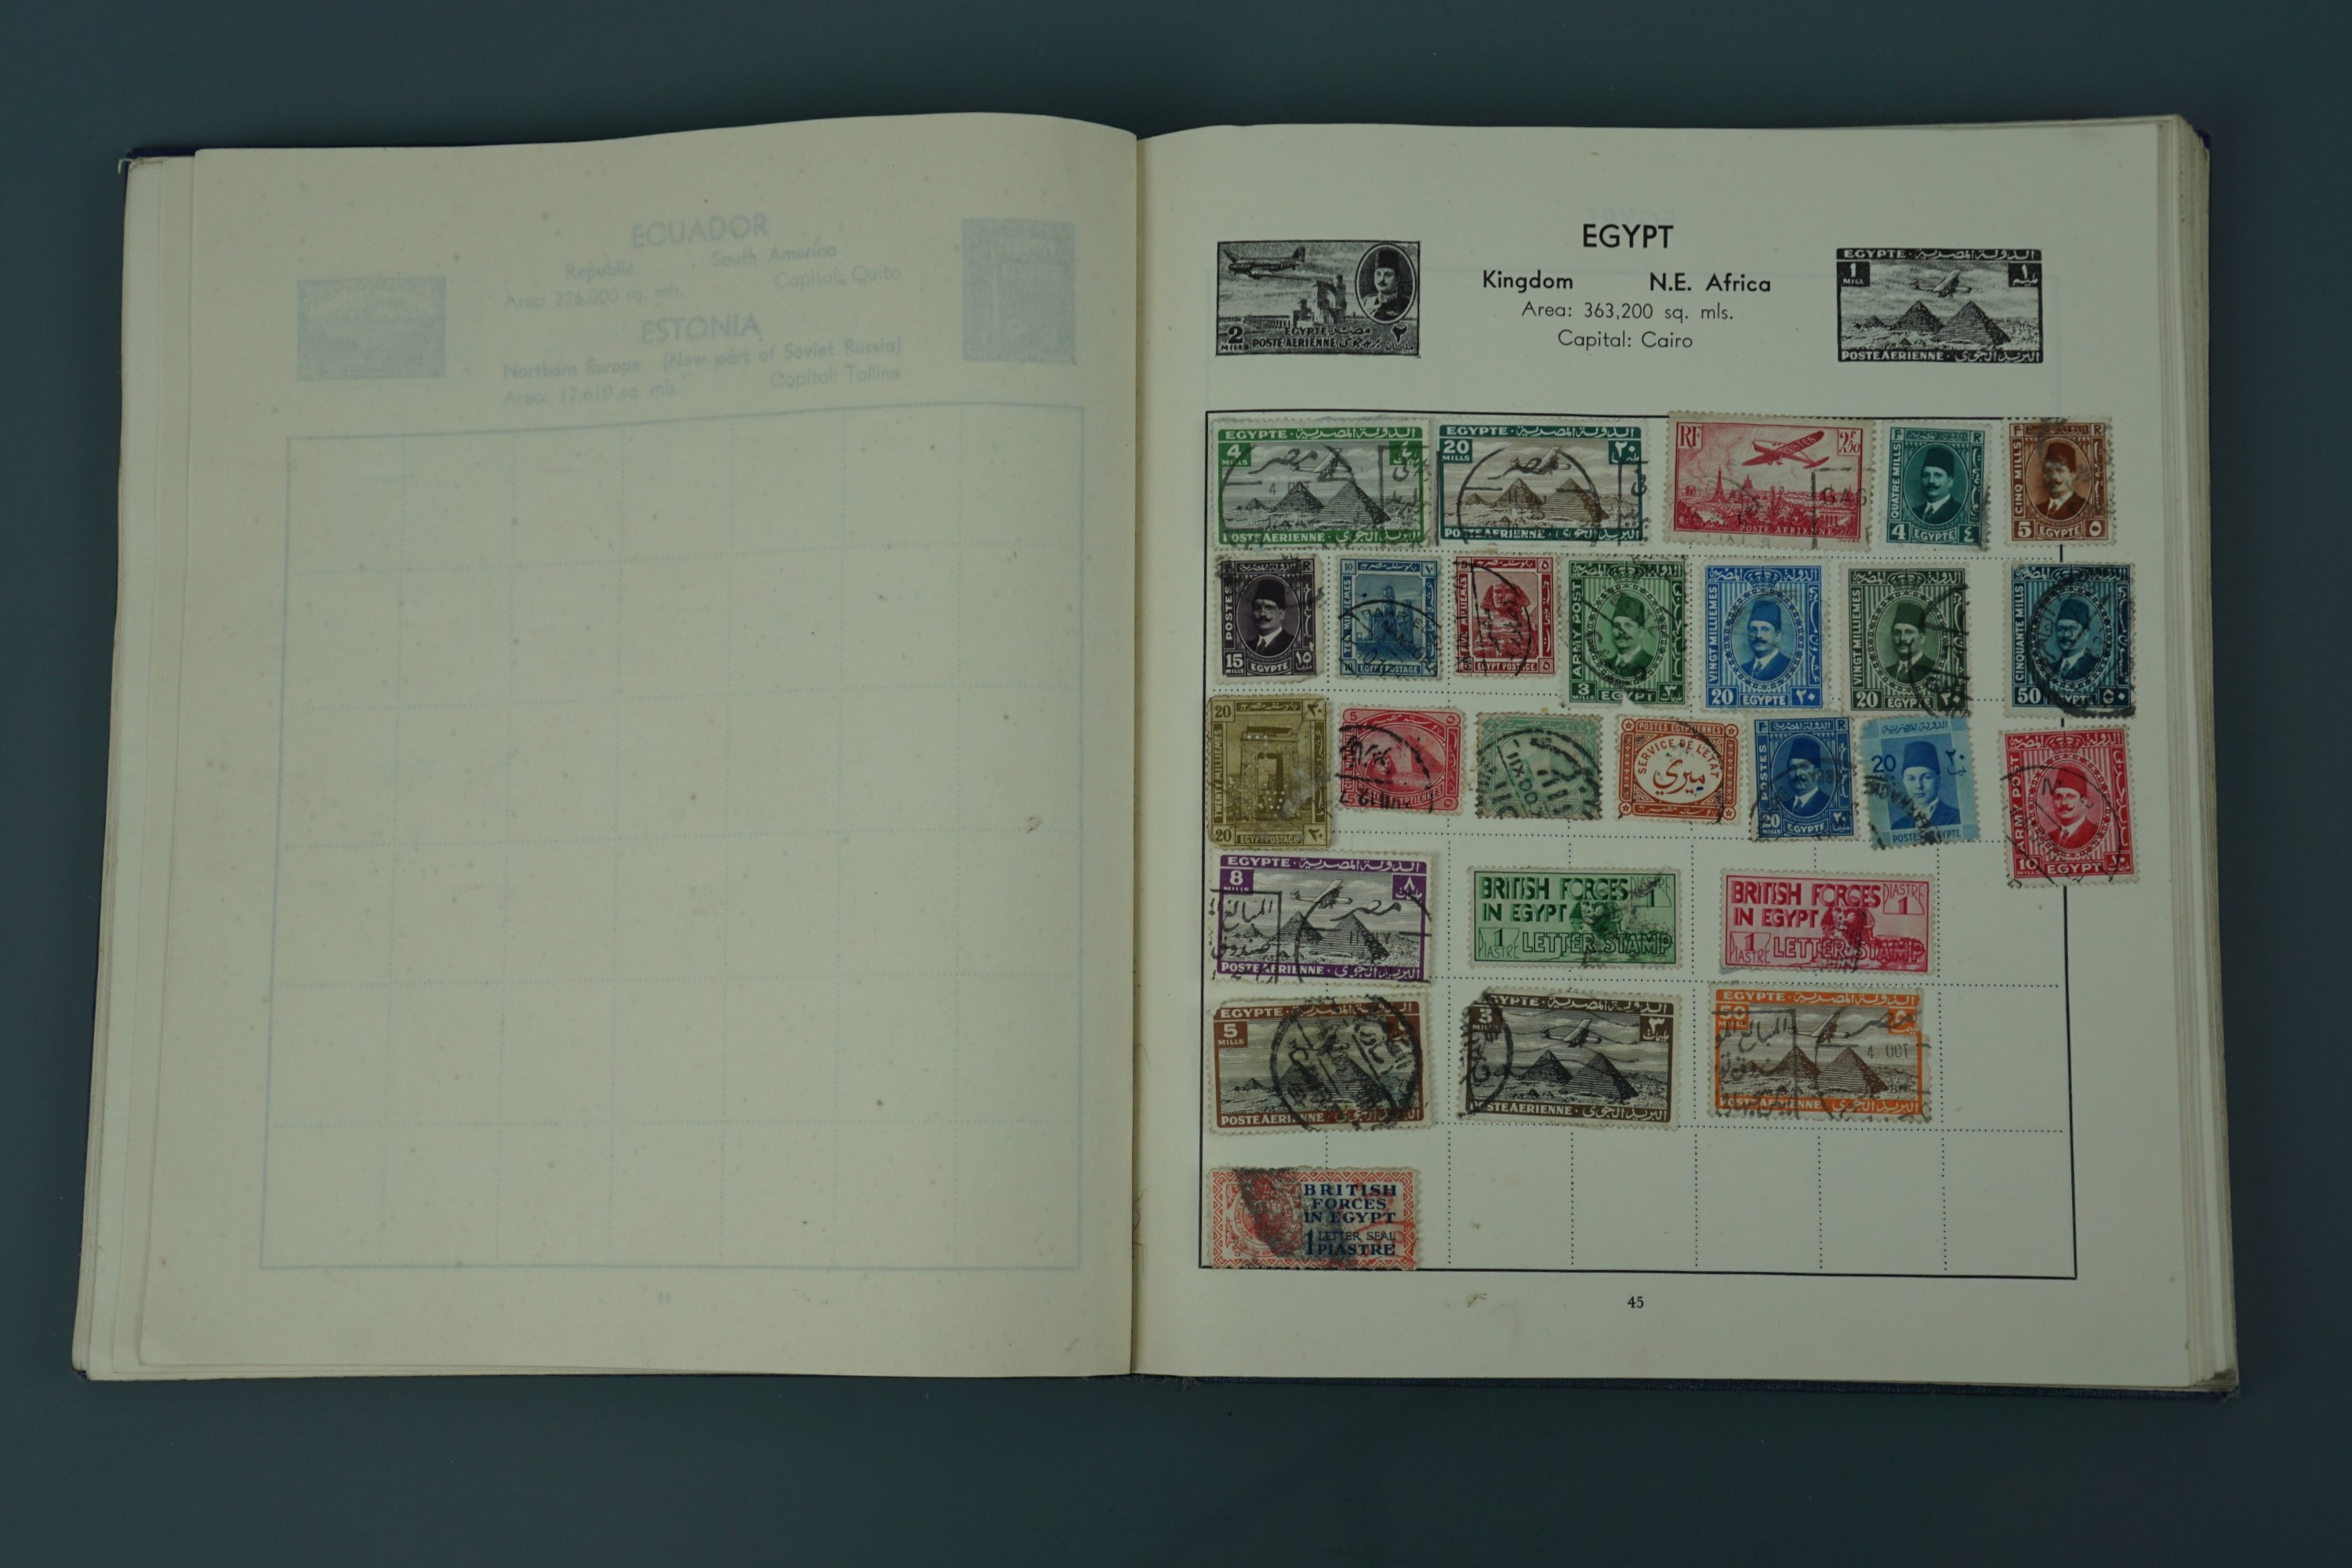 A mid-20th Century Stirling album and stamps